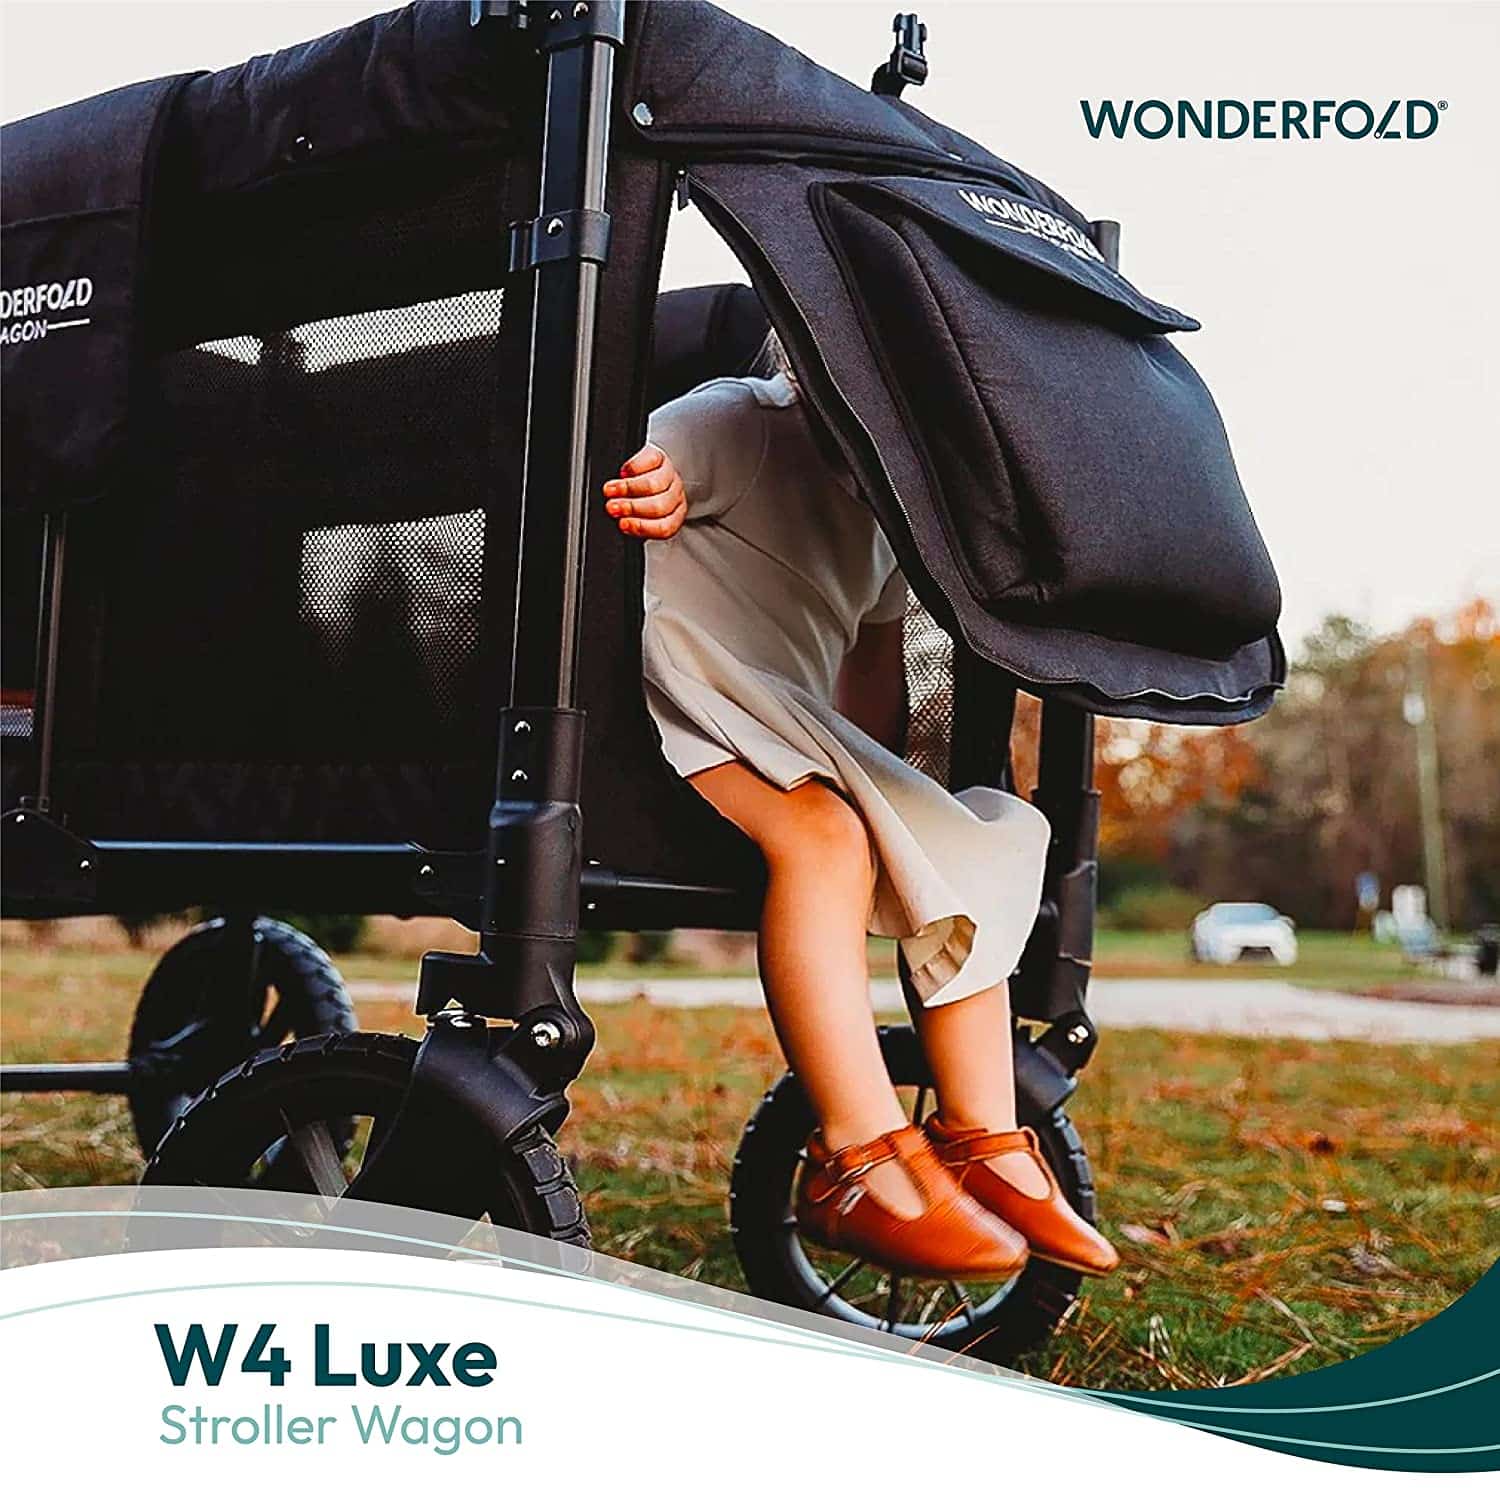 Wonderfold Wagon: A Review of its Design, Features, and Functionality  – March 2023